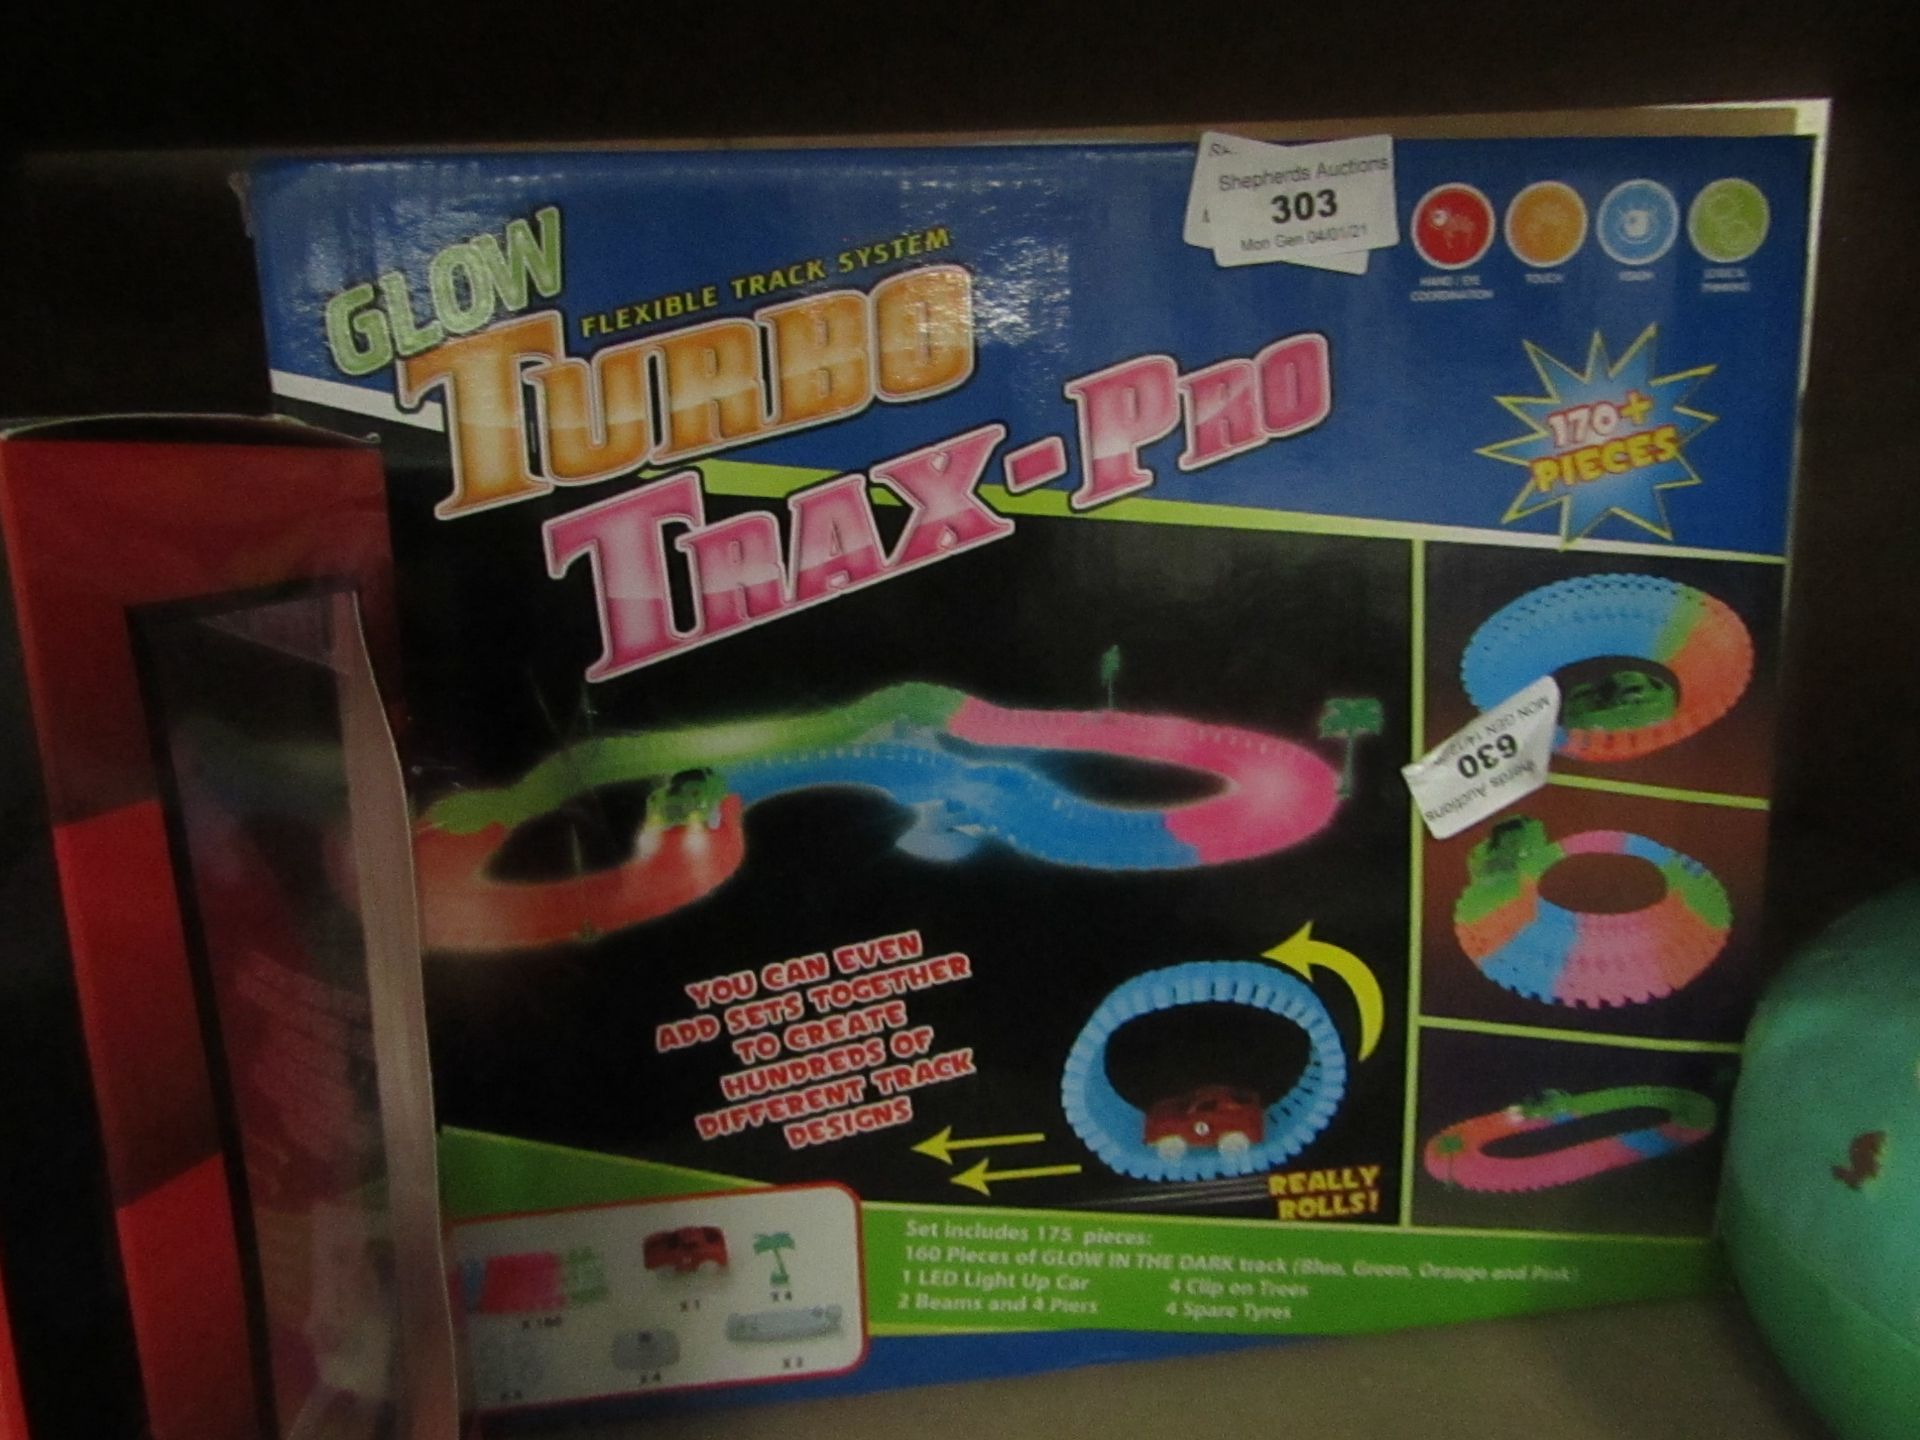 Glow Turbo Trax Pro - Unchecked & Boxed.